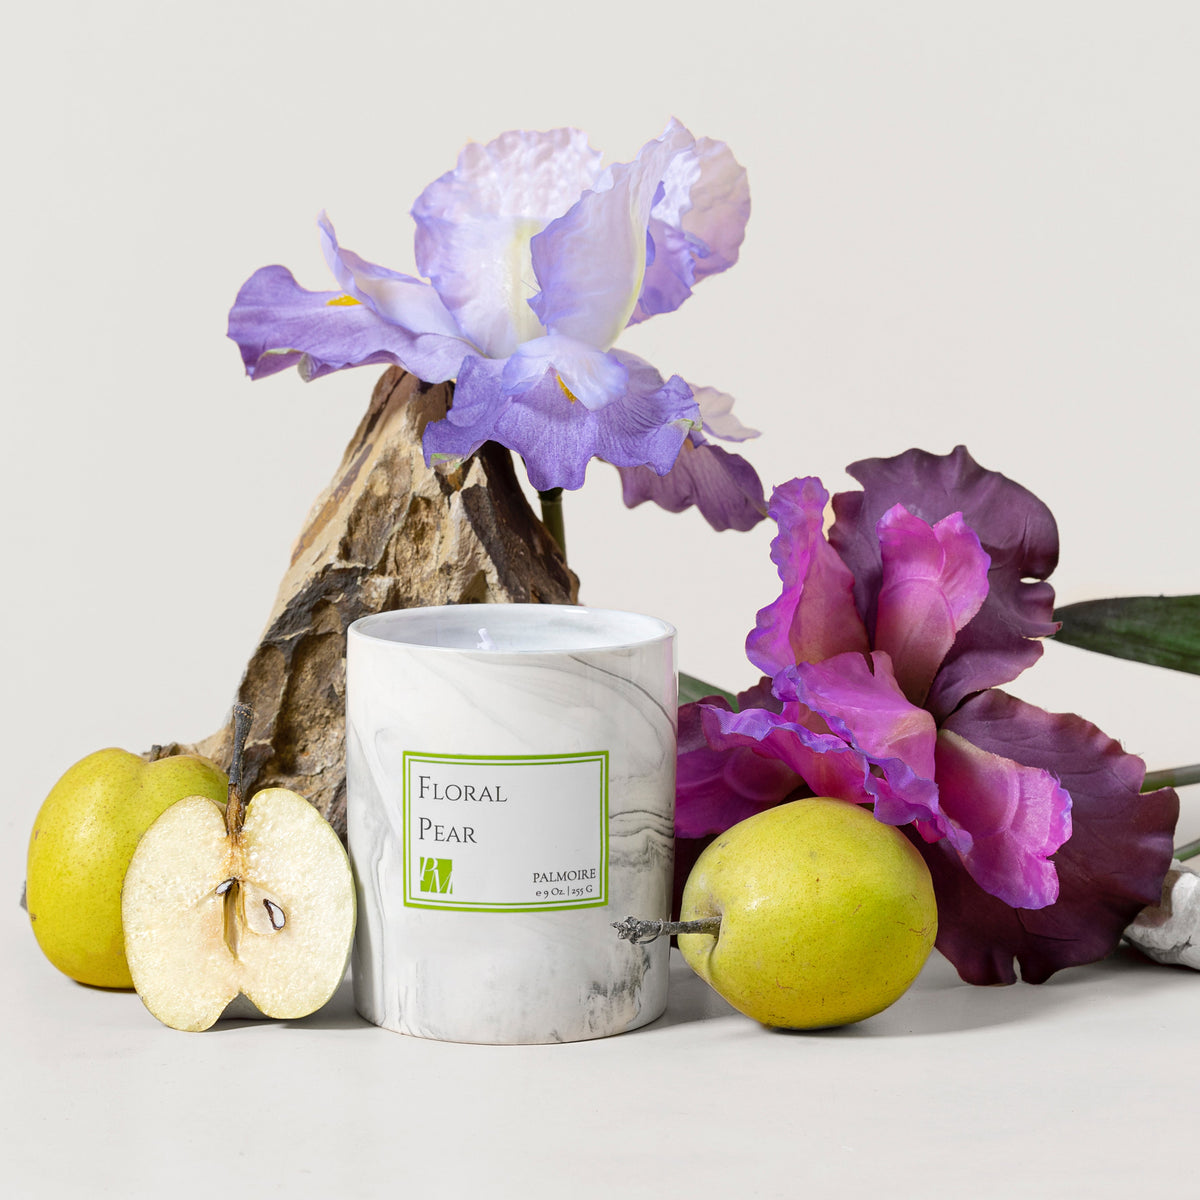 Floral Pear Soy Wax Candle